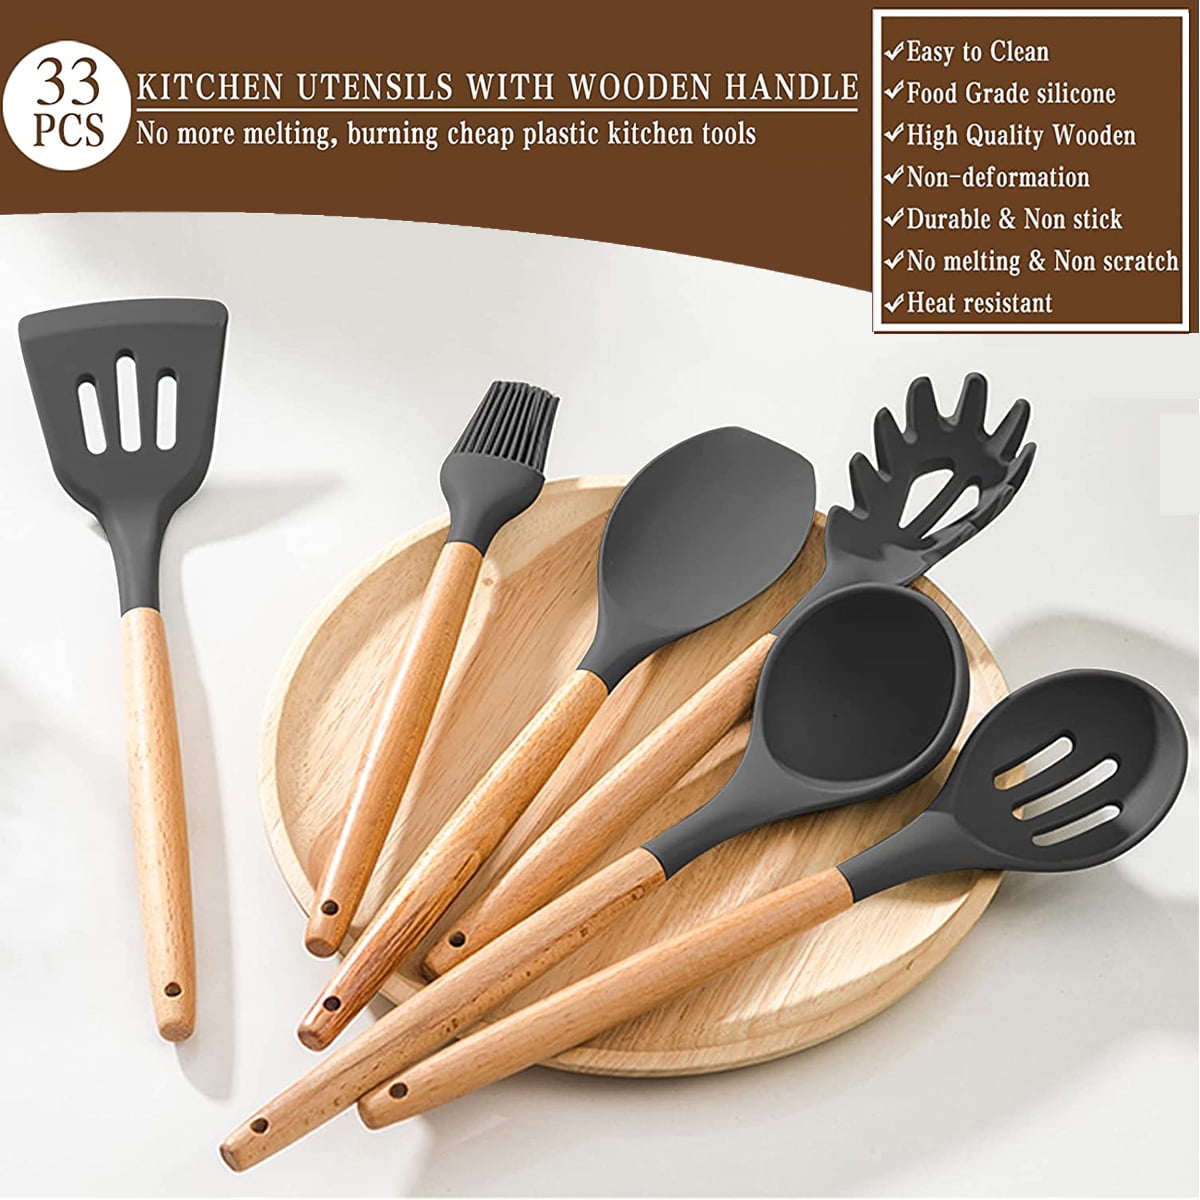 Htovila Silicone Cooking Utensil Set Non-Stick Kitchen Utensils Set 10 Pcs Heat Resistant Kitchen Tools with Wooden Handle, Size: 10.5